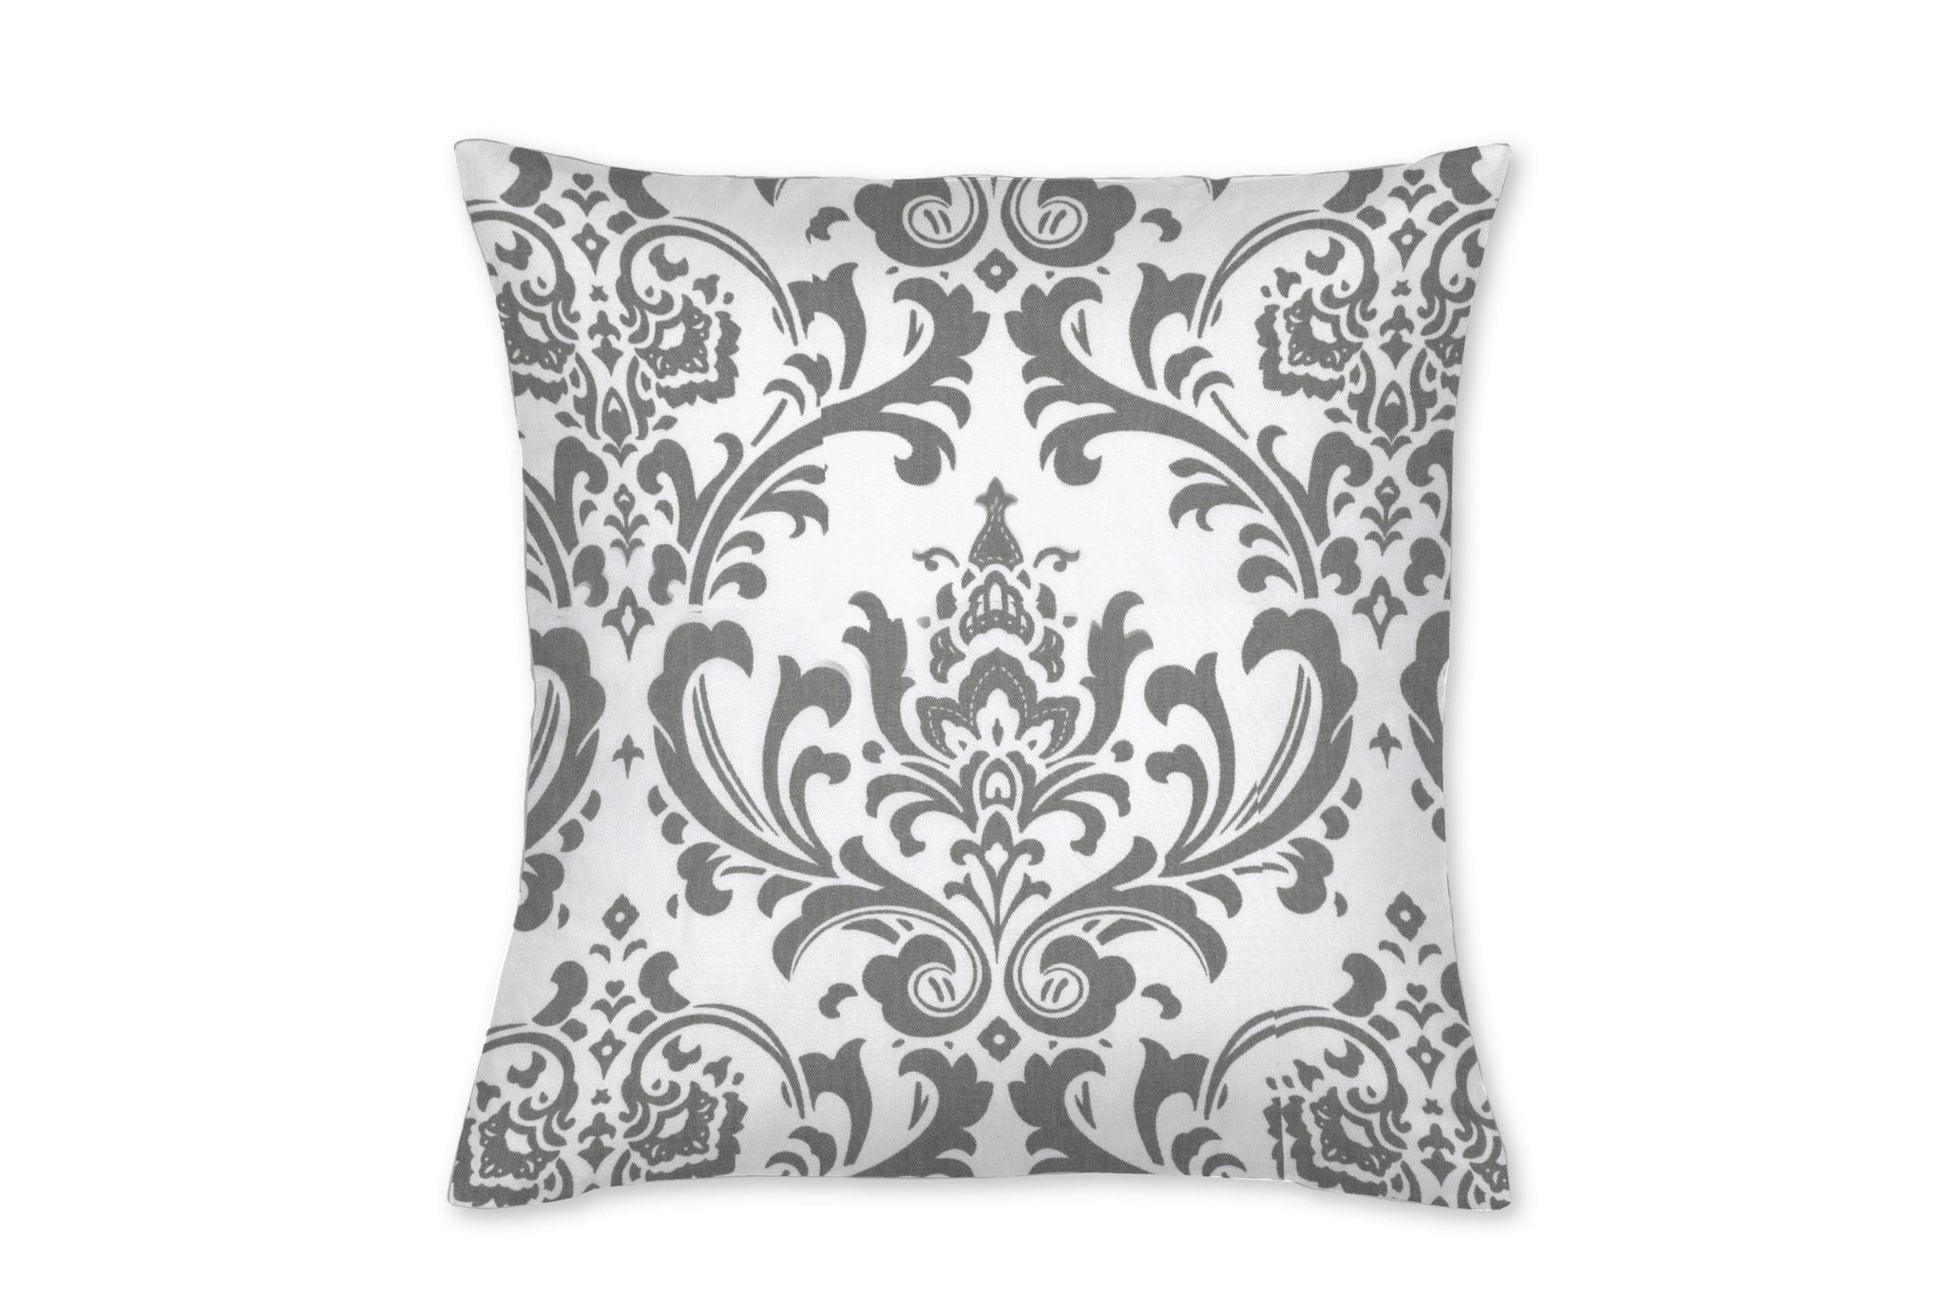 Pink and Gray Traditions Throw Pillow - New Arrivals Inc